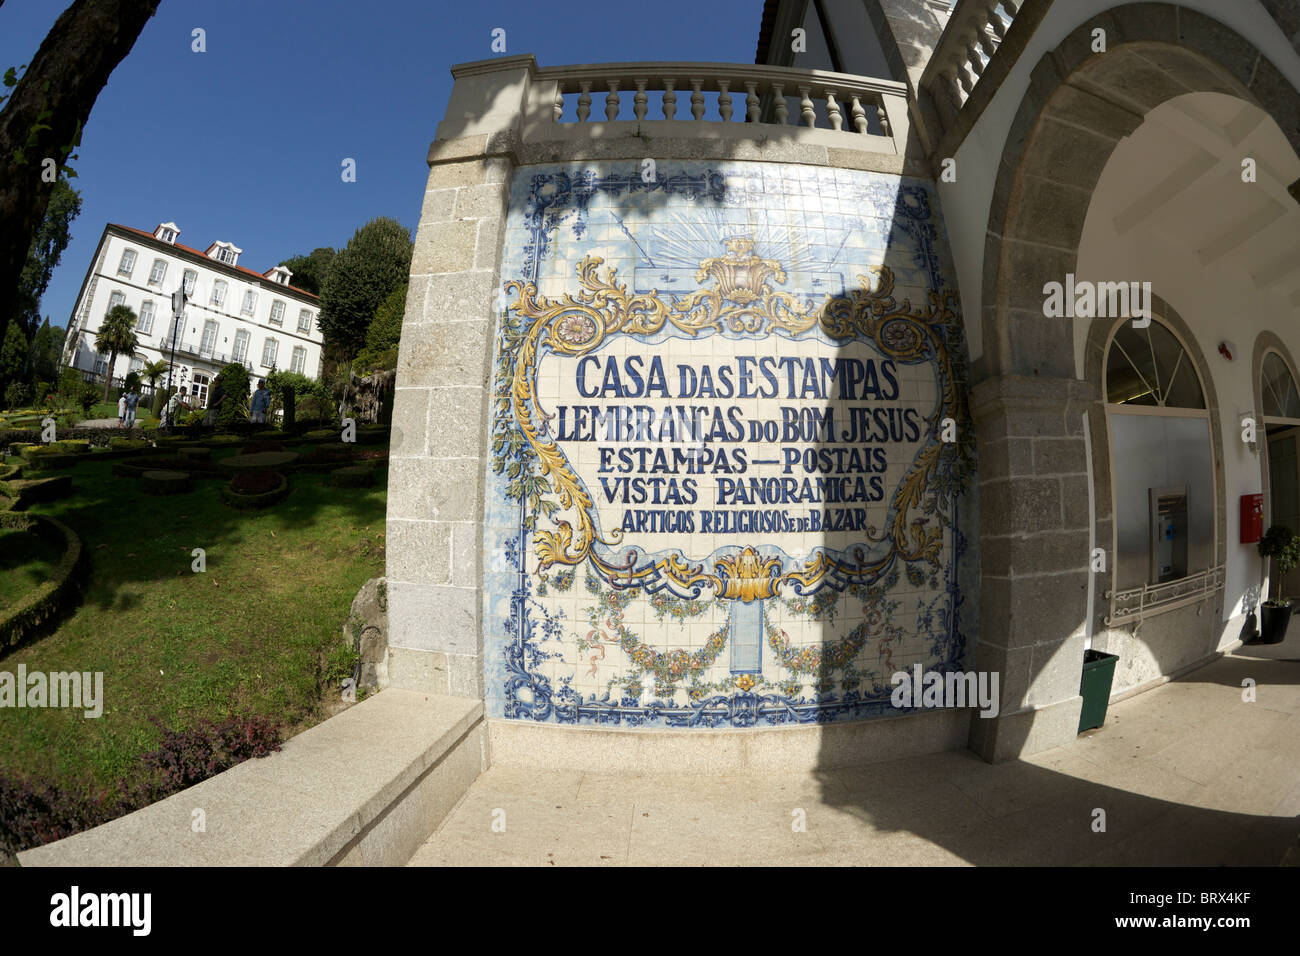 Shop selling stamps and other souvenirs at Bom Jesus do Monte above Braga in Portugal. The sign is produced on decorative tiles. Stock Photo